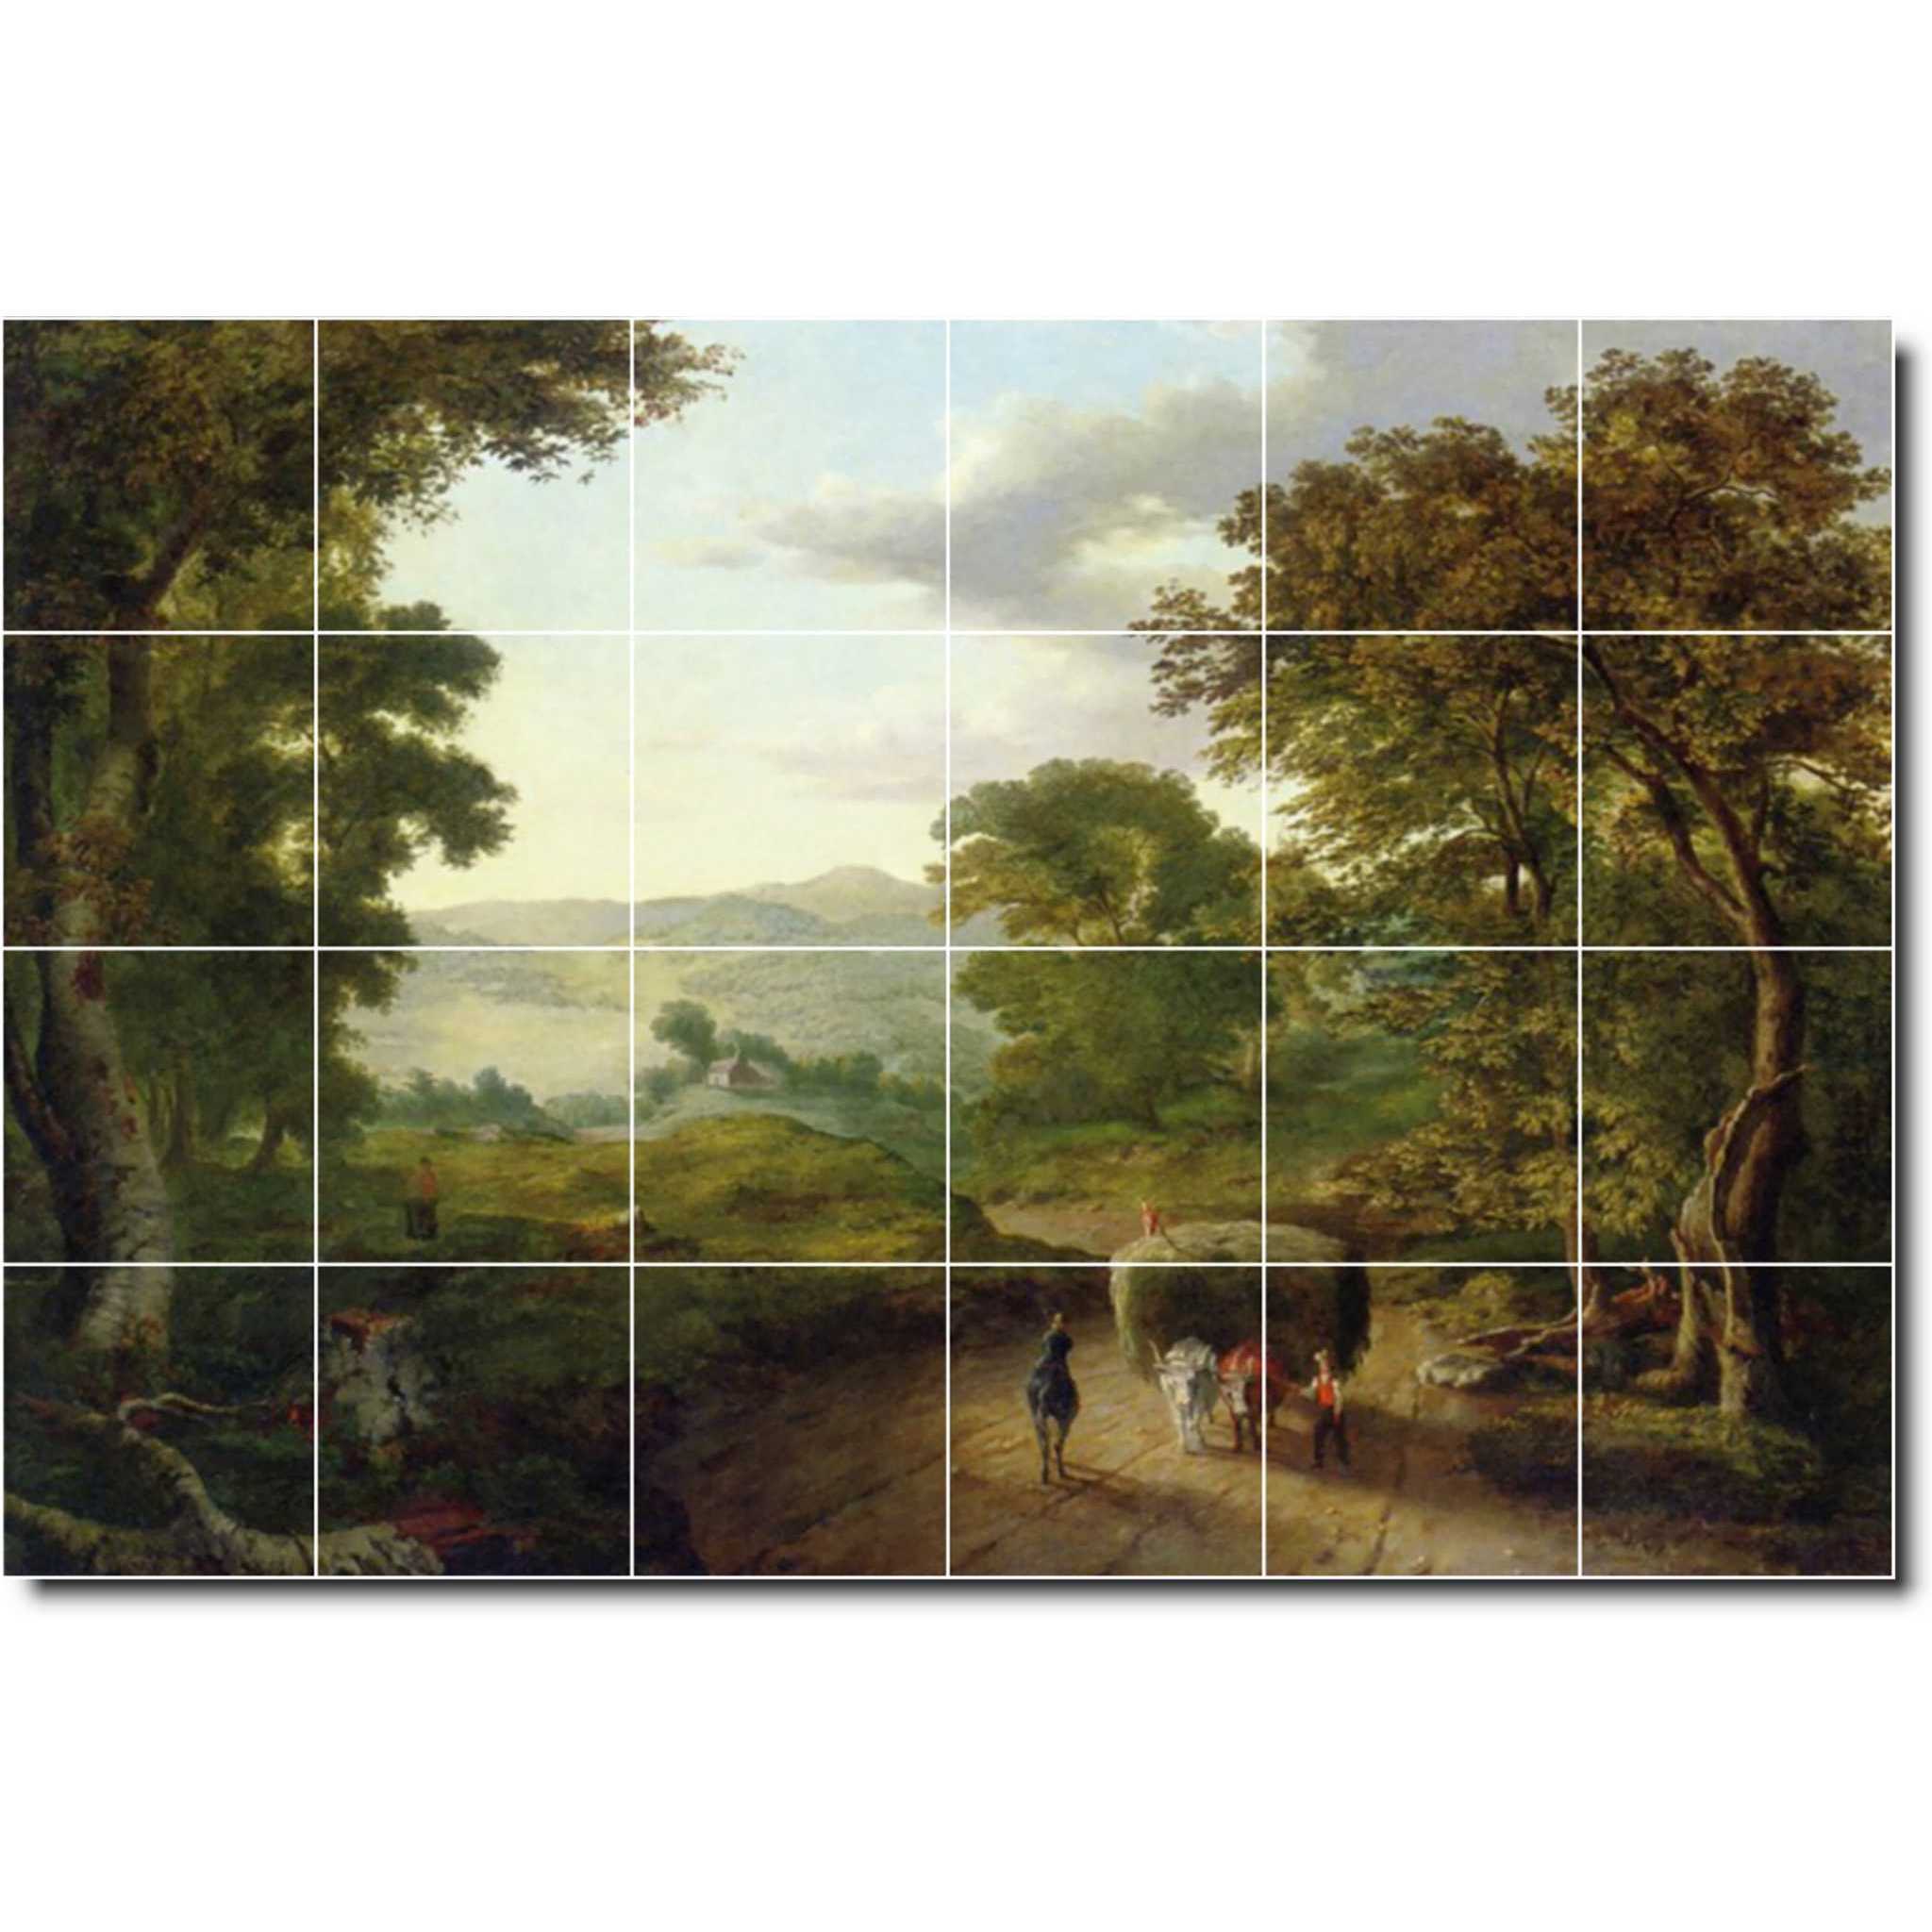 george inness country painting ceramic tile mural p04775